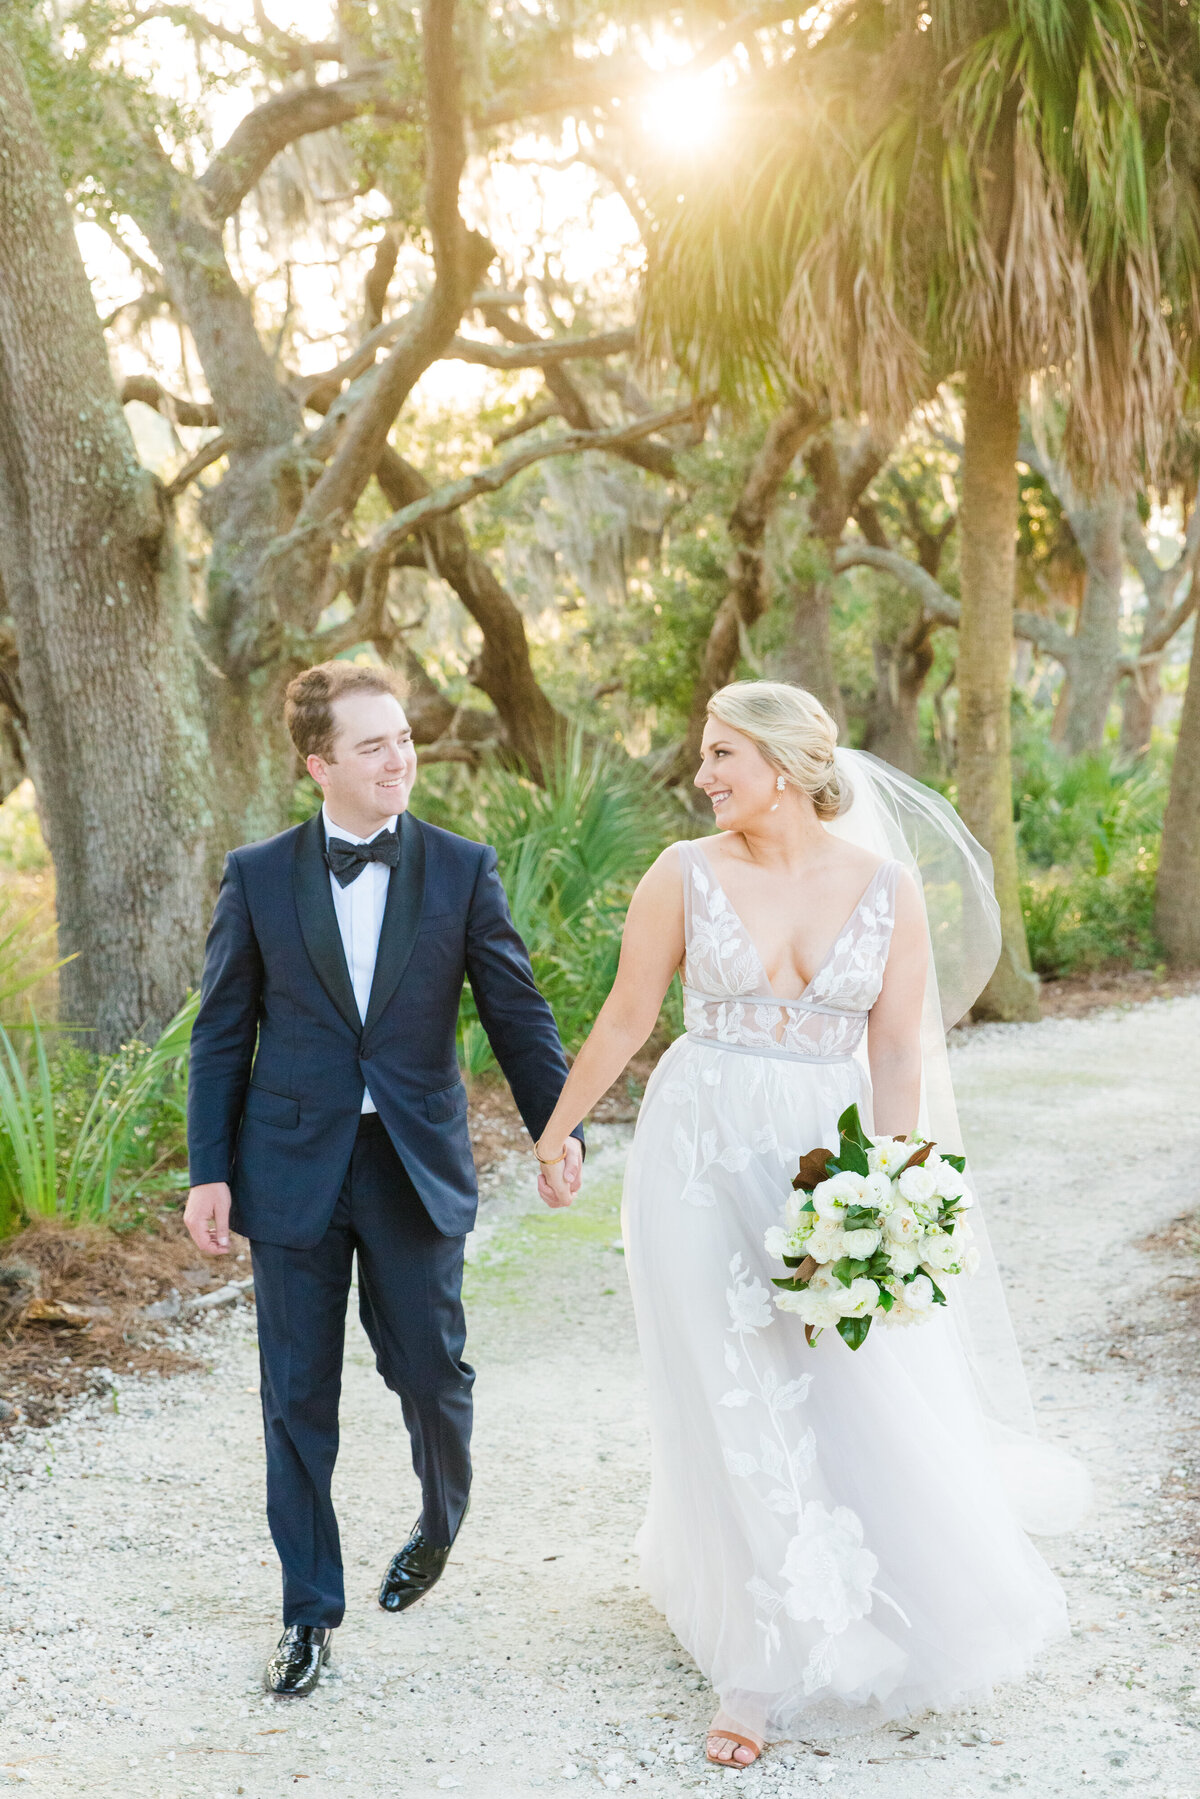 Bride and groom portraits after their Palmetto Bluff wedding near Charleston, SC. Photographed by destination wedding photographer Dana Cubbage.